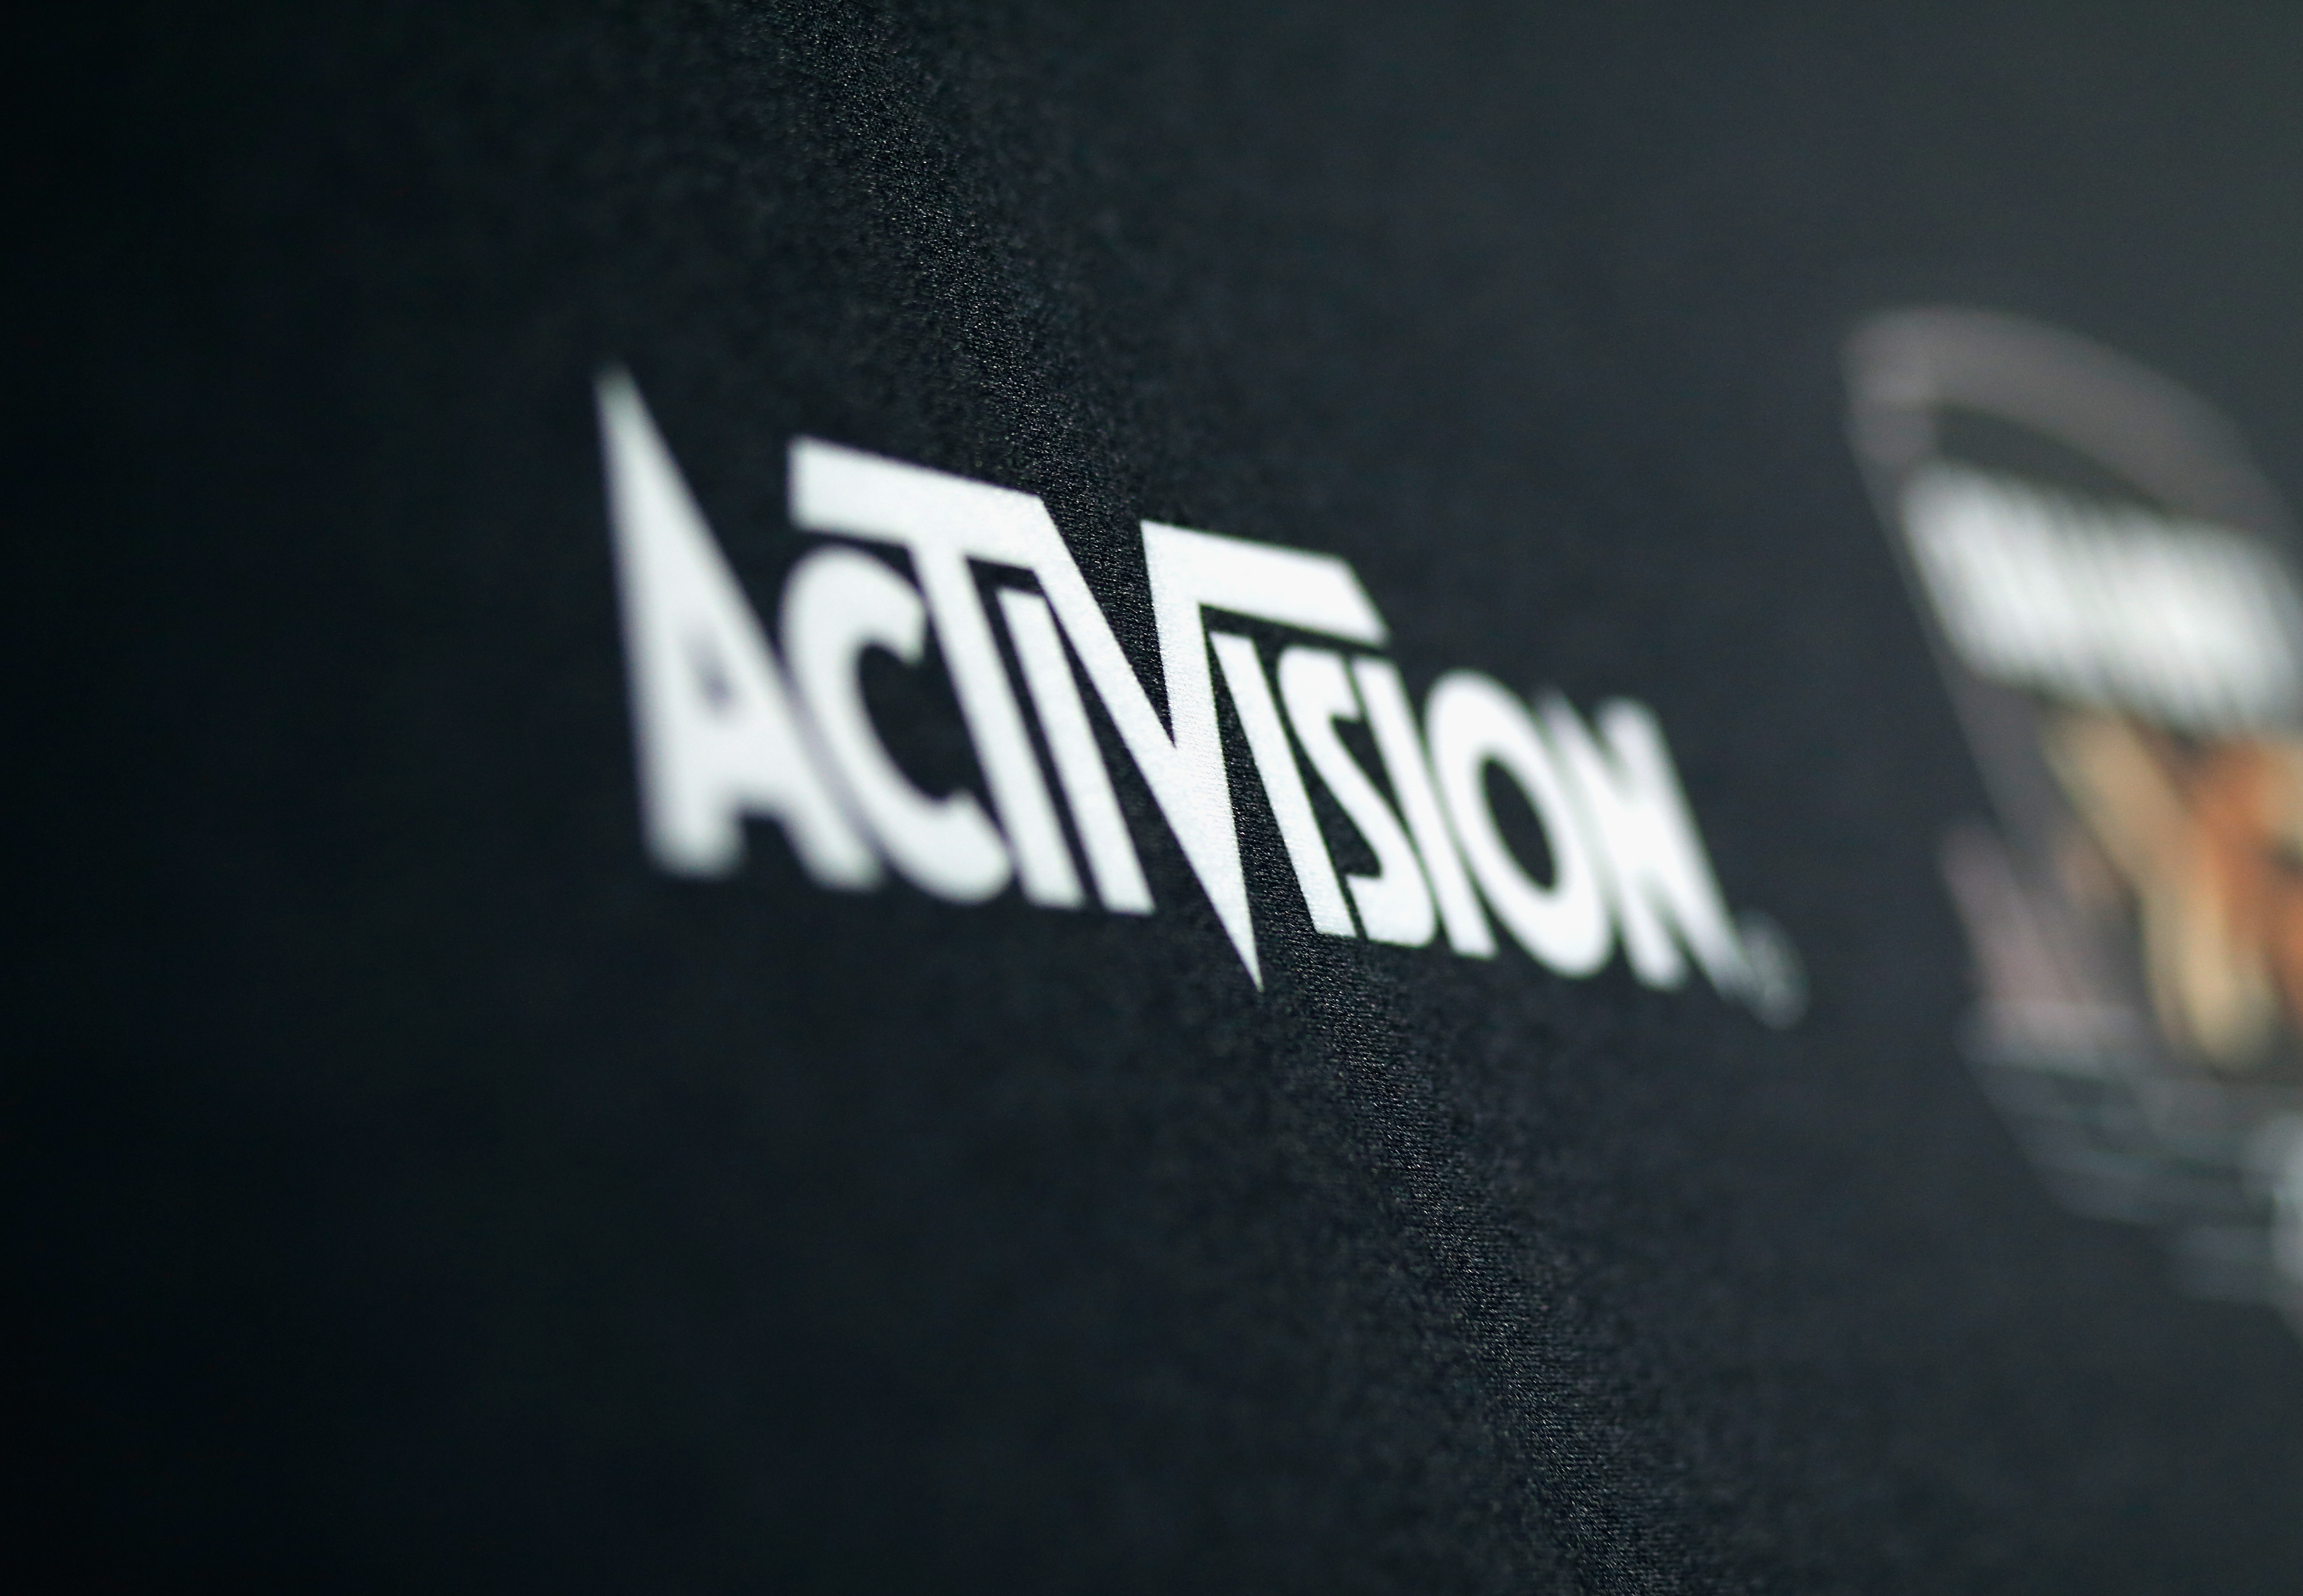 Brazil Approves Microsoft's (NASDAQ:MSFT) Buyout of Activision 